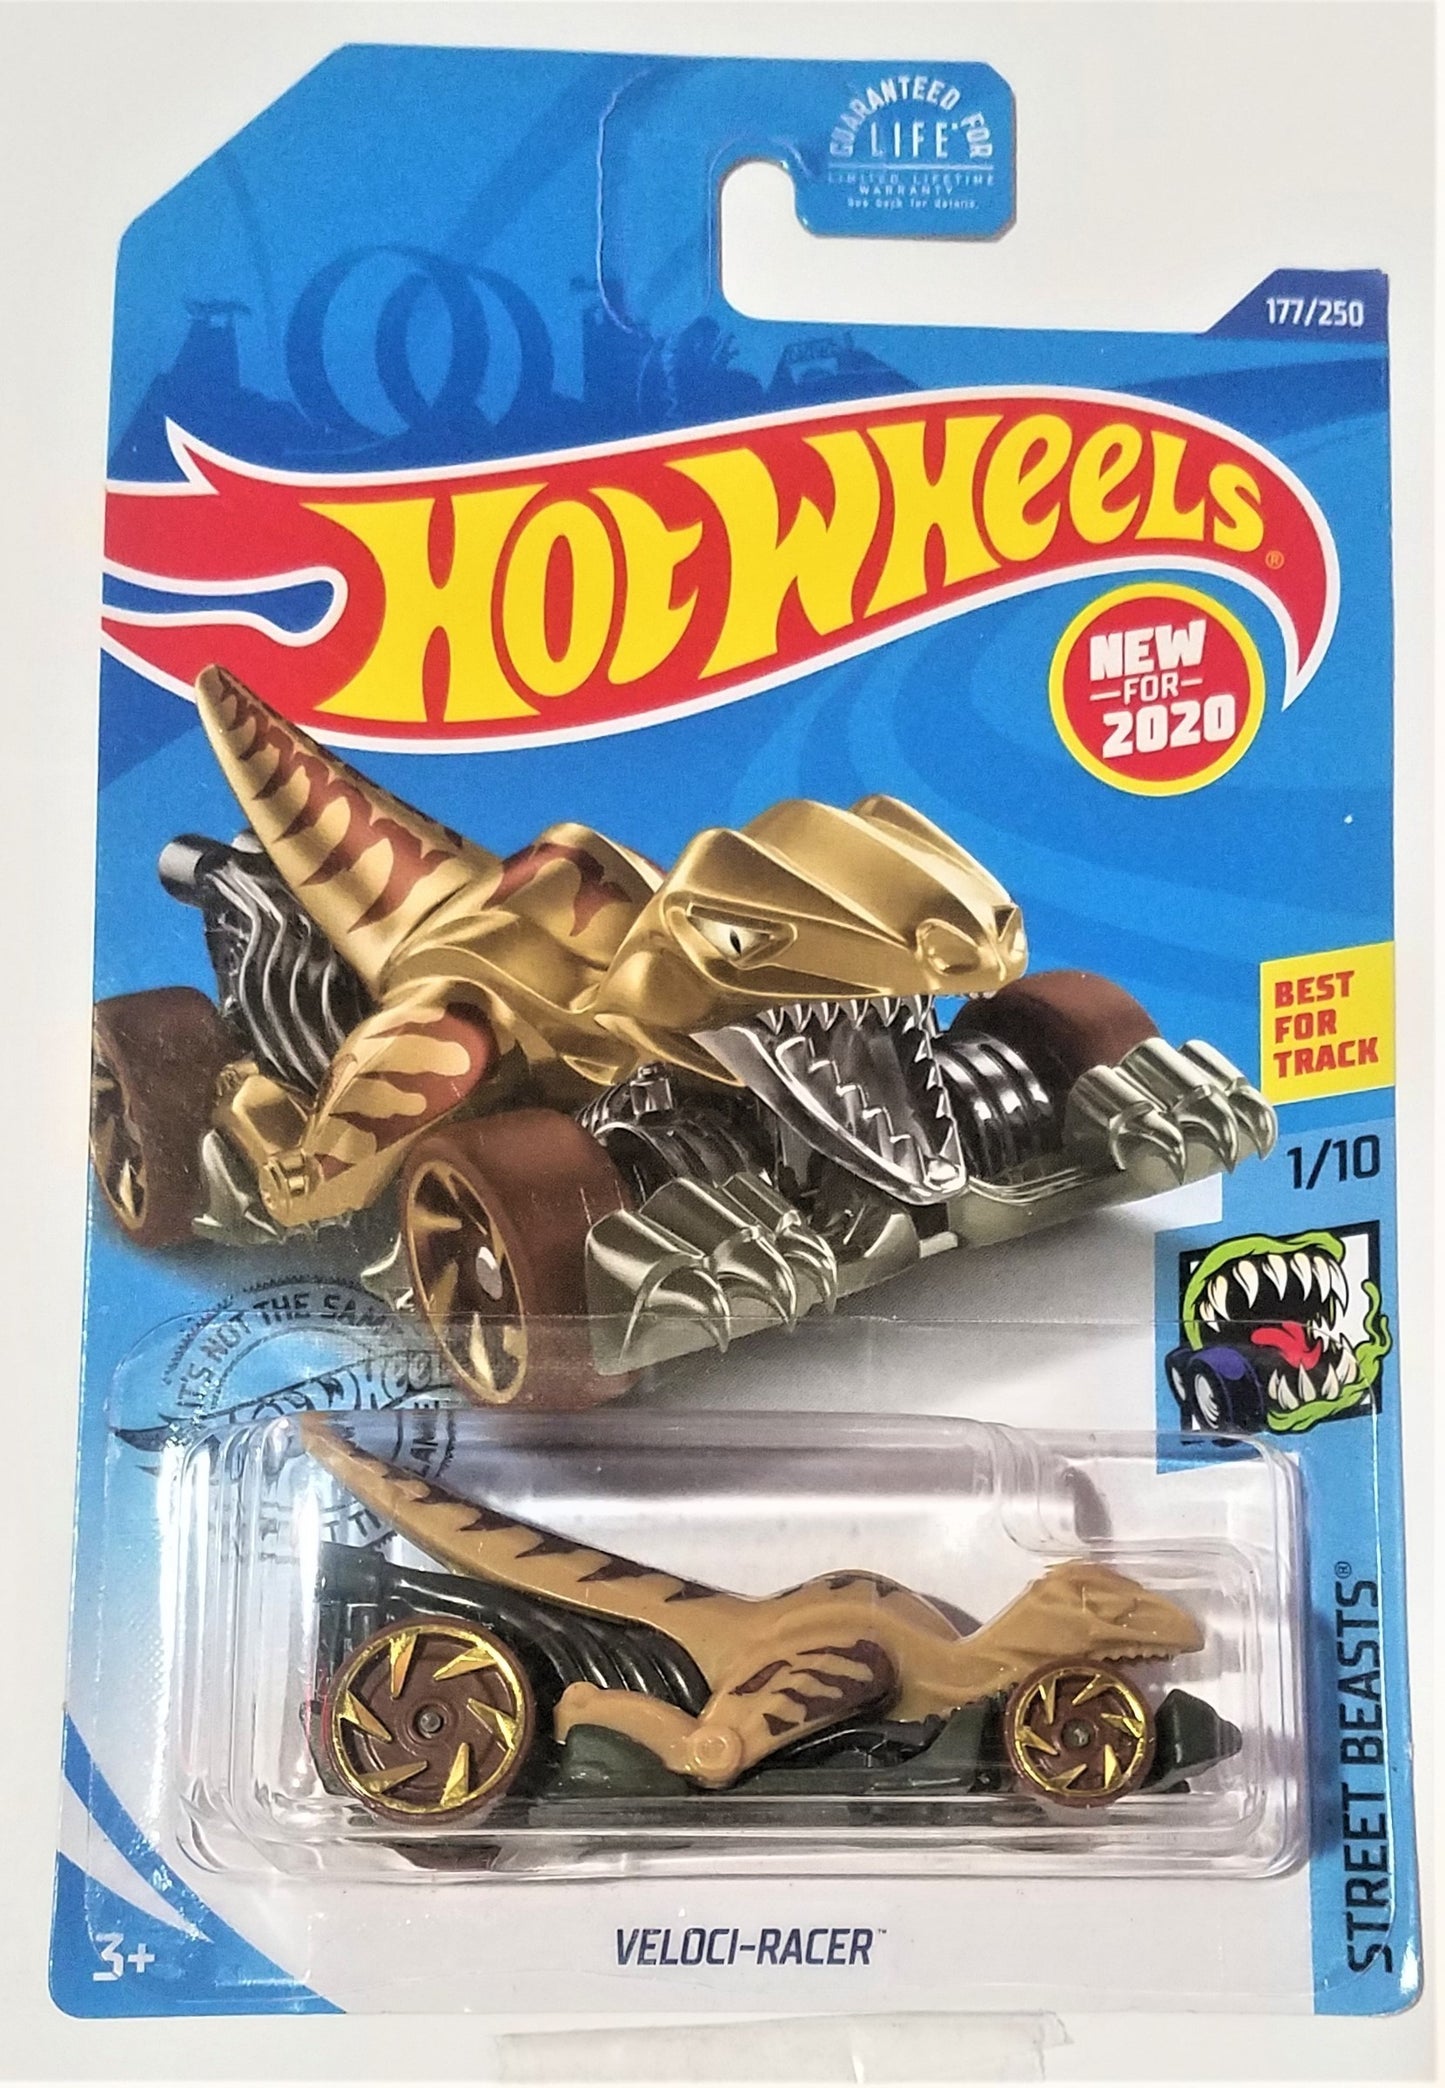 Hot Wheels 2020 - Collector # 177/250 - Street Beasts 1/10 - New Models - Veloci-Racer - Tan